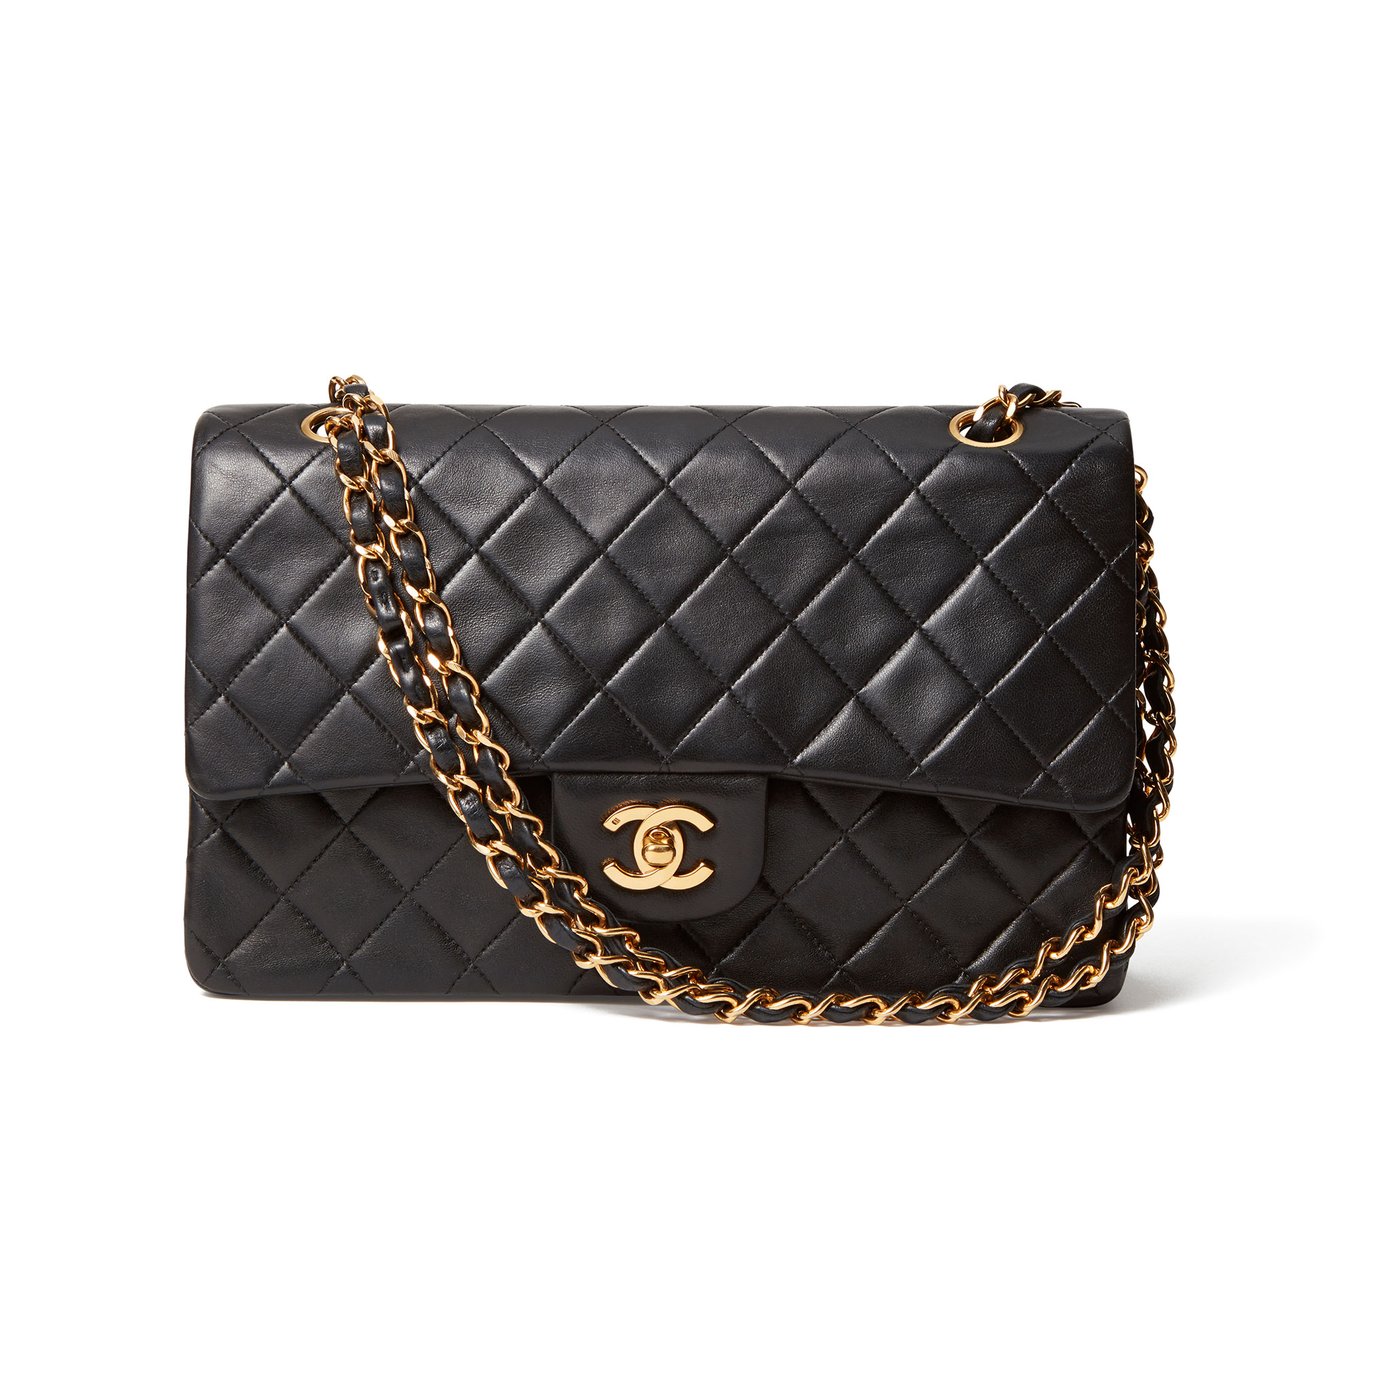 What Goes Around Comes Around Chanel 2.55 Lambskin Bag